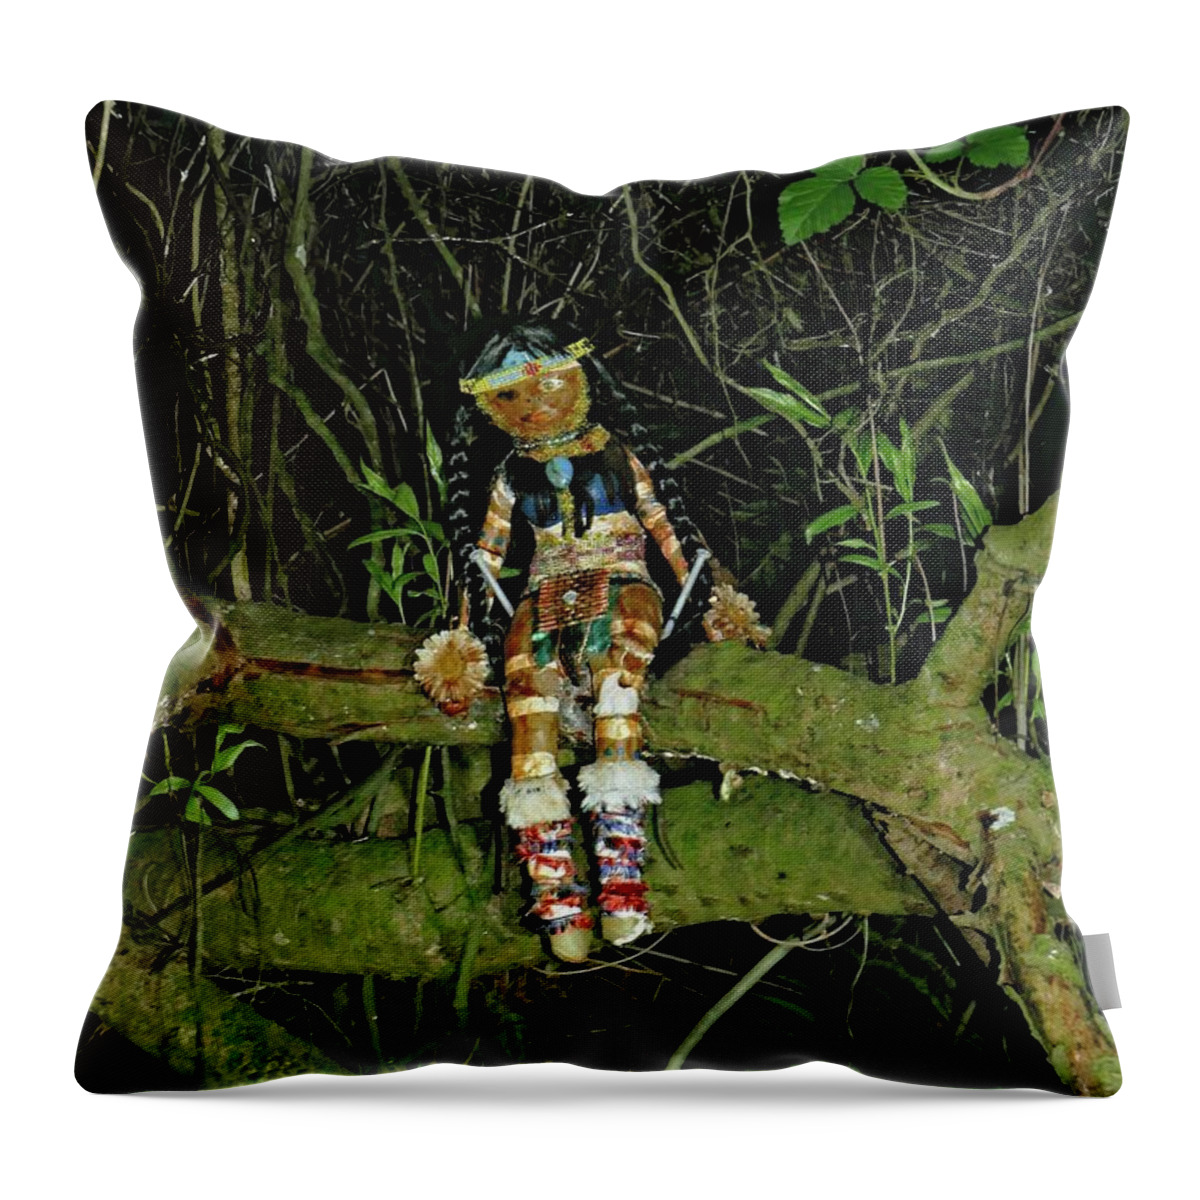 Doll Throw Pillow featuring the photograph Spooky doll in forest by Martin Smith